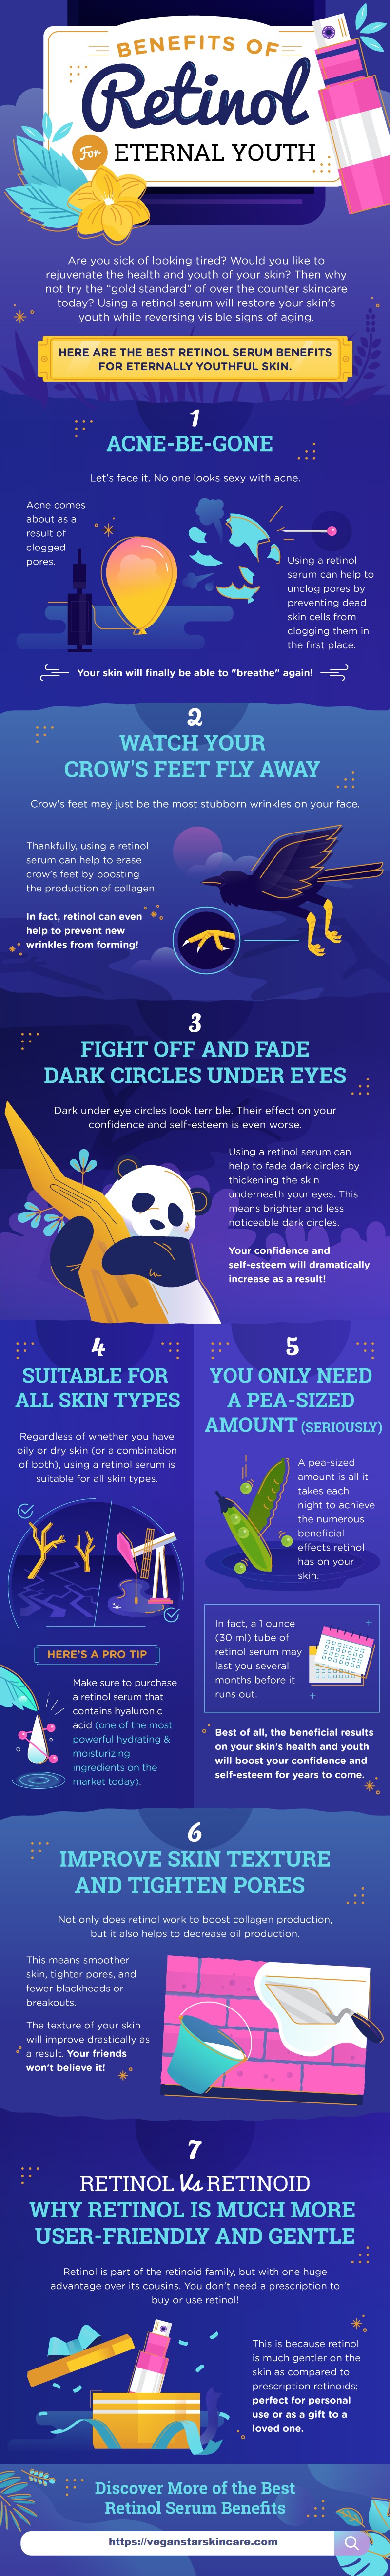 Benefits of Retinol for Eternal Youth Infographic